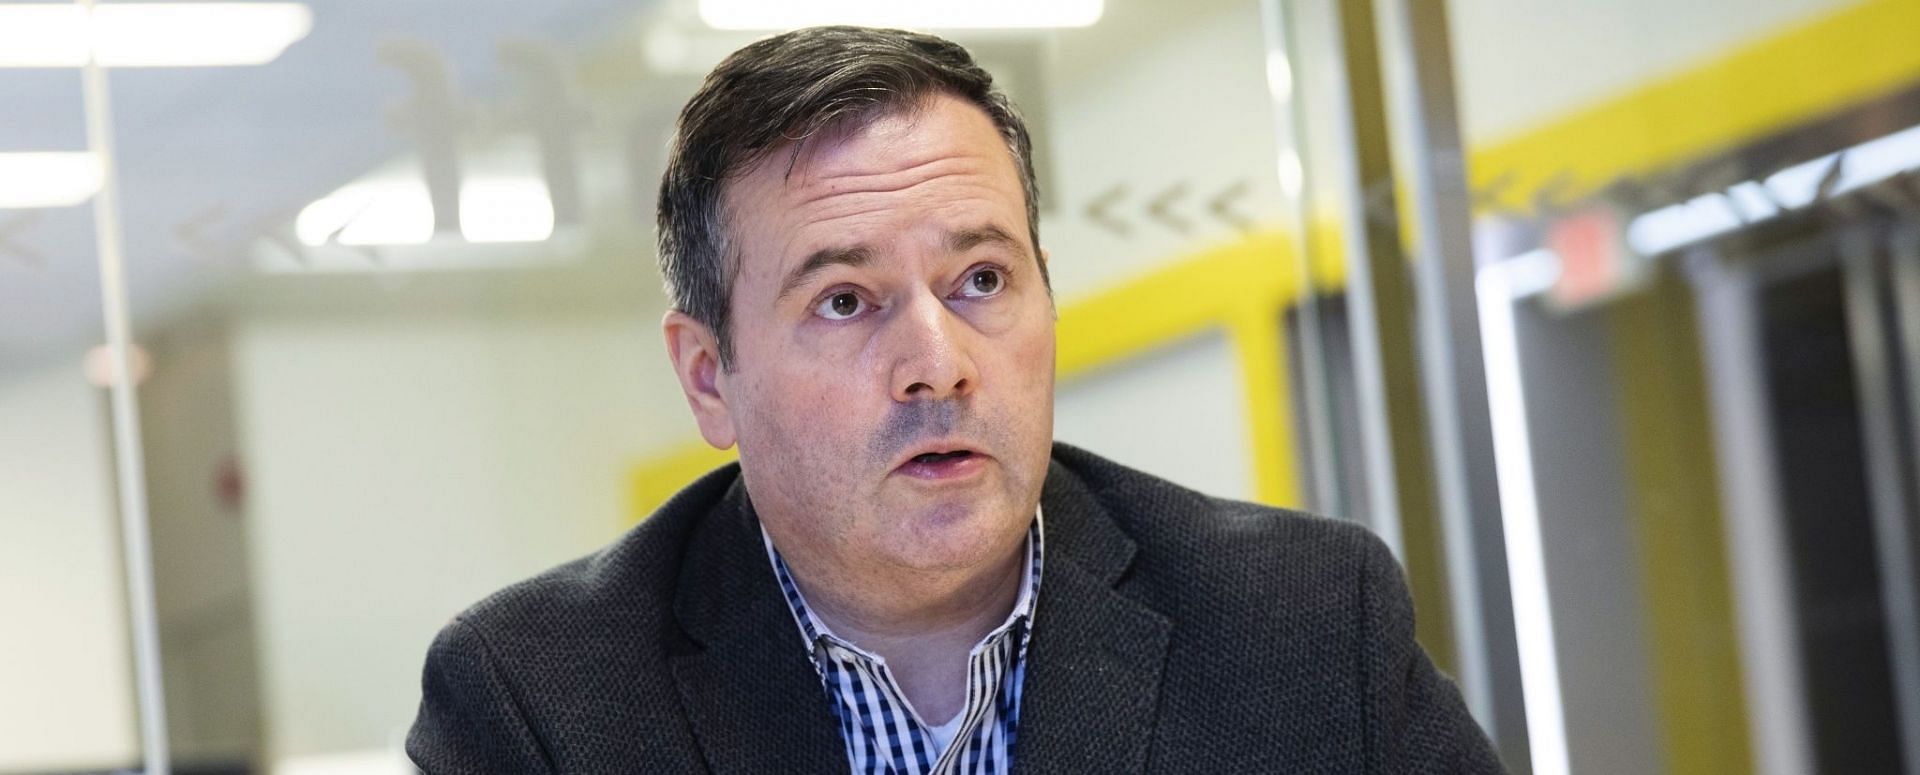 Jason Kenney landed in hot waters after making racially-offensive comments in relation to the COVID-19 pandemic (Image via Todd Korol/Getty Images)